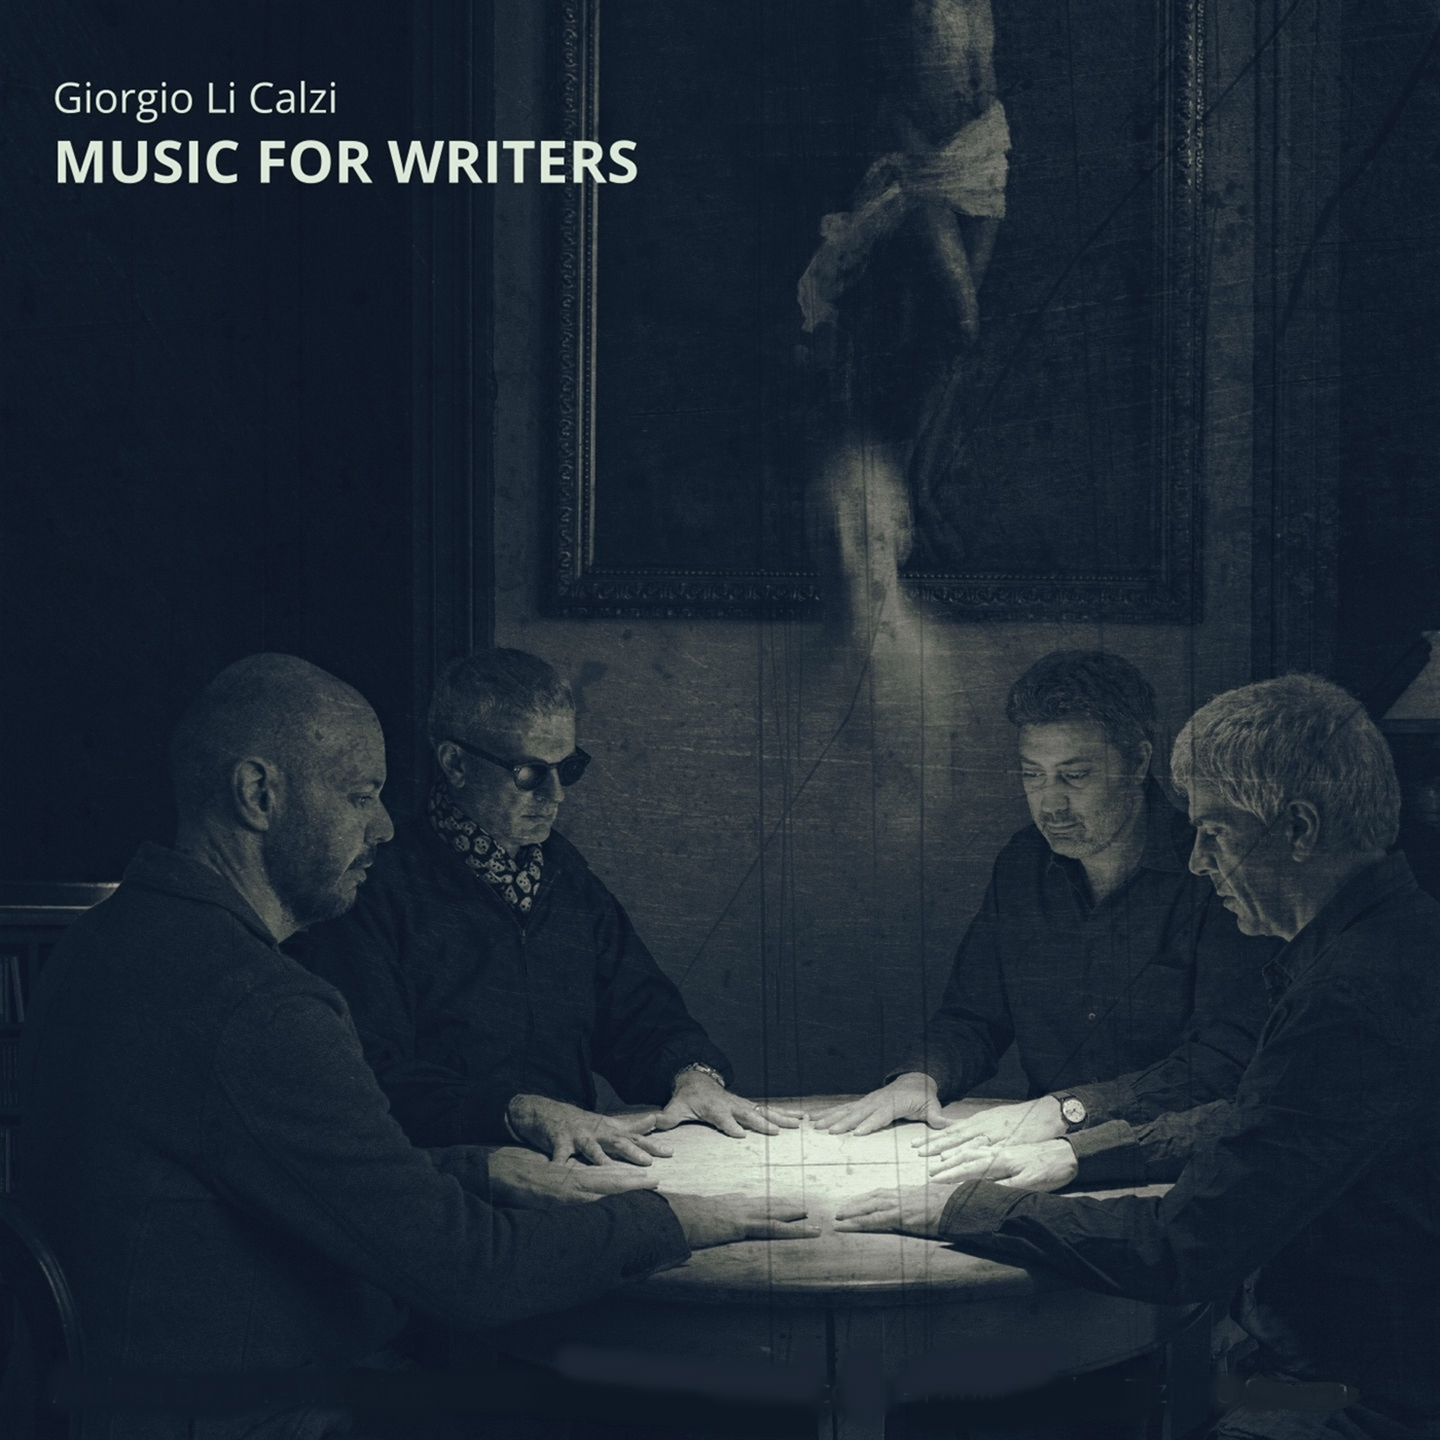 MUSIC FOR WRITERS